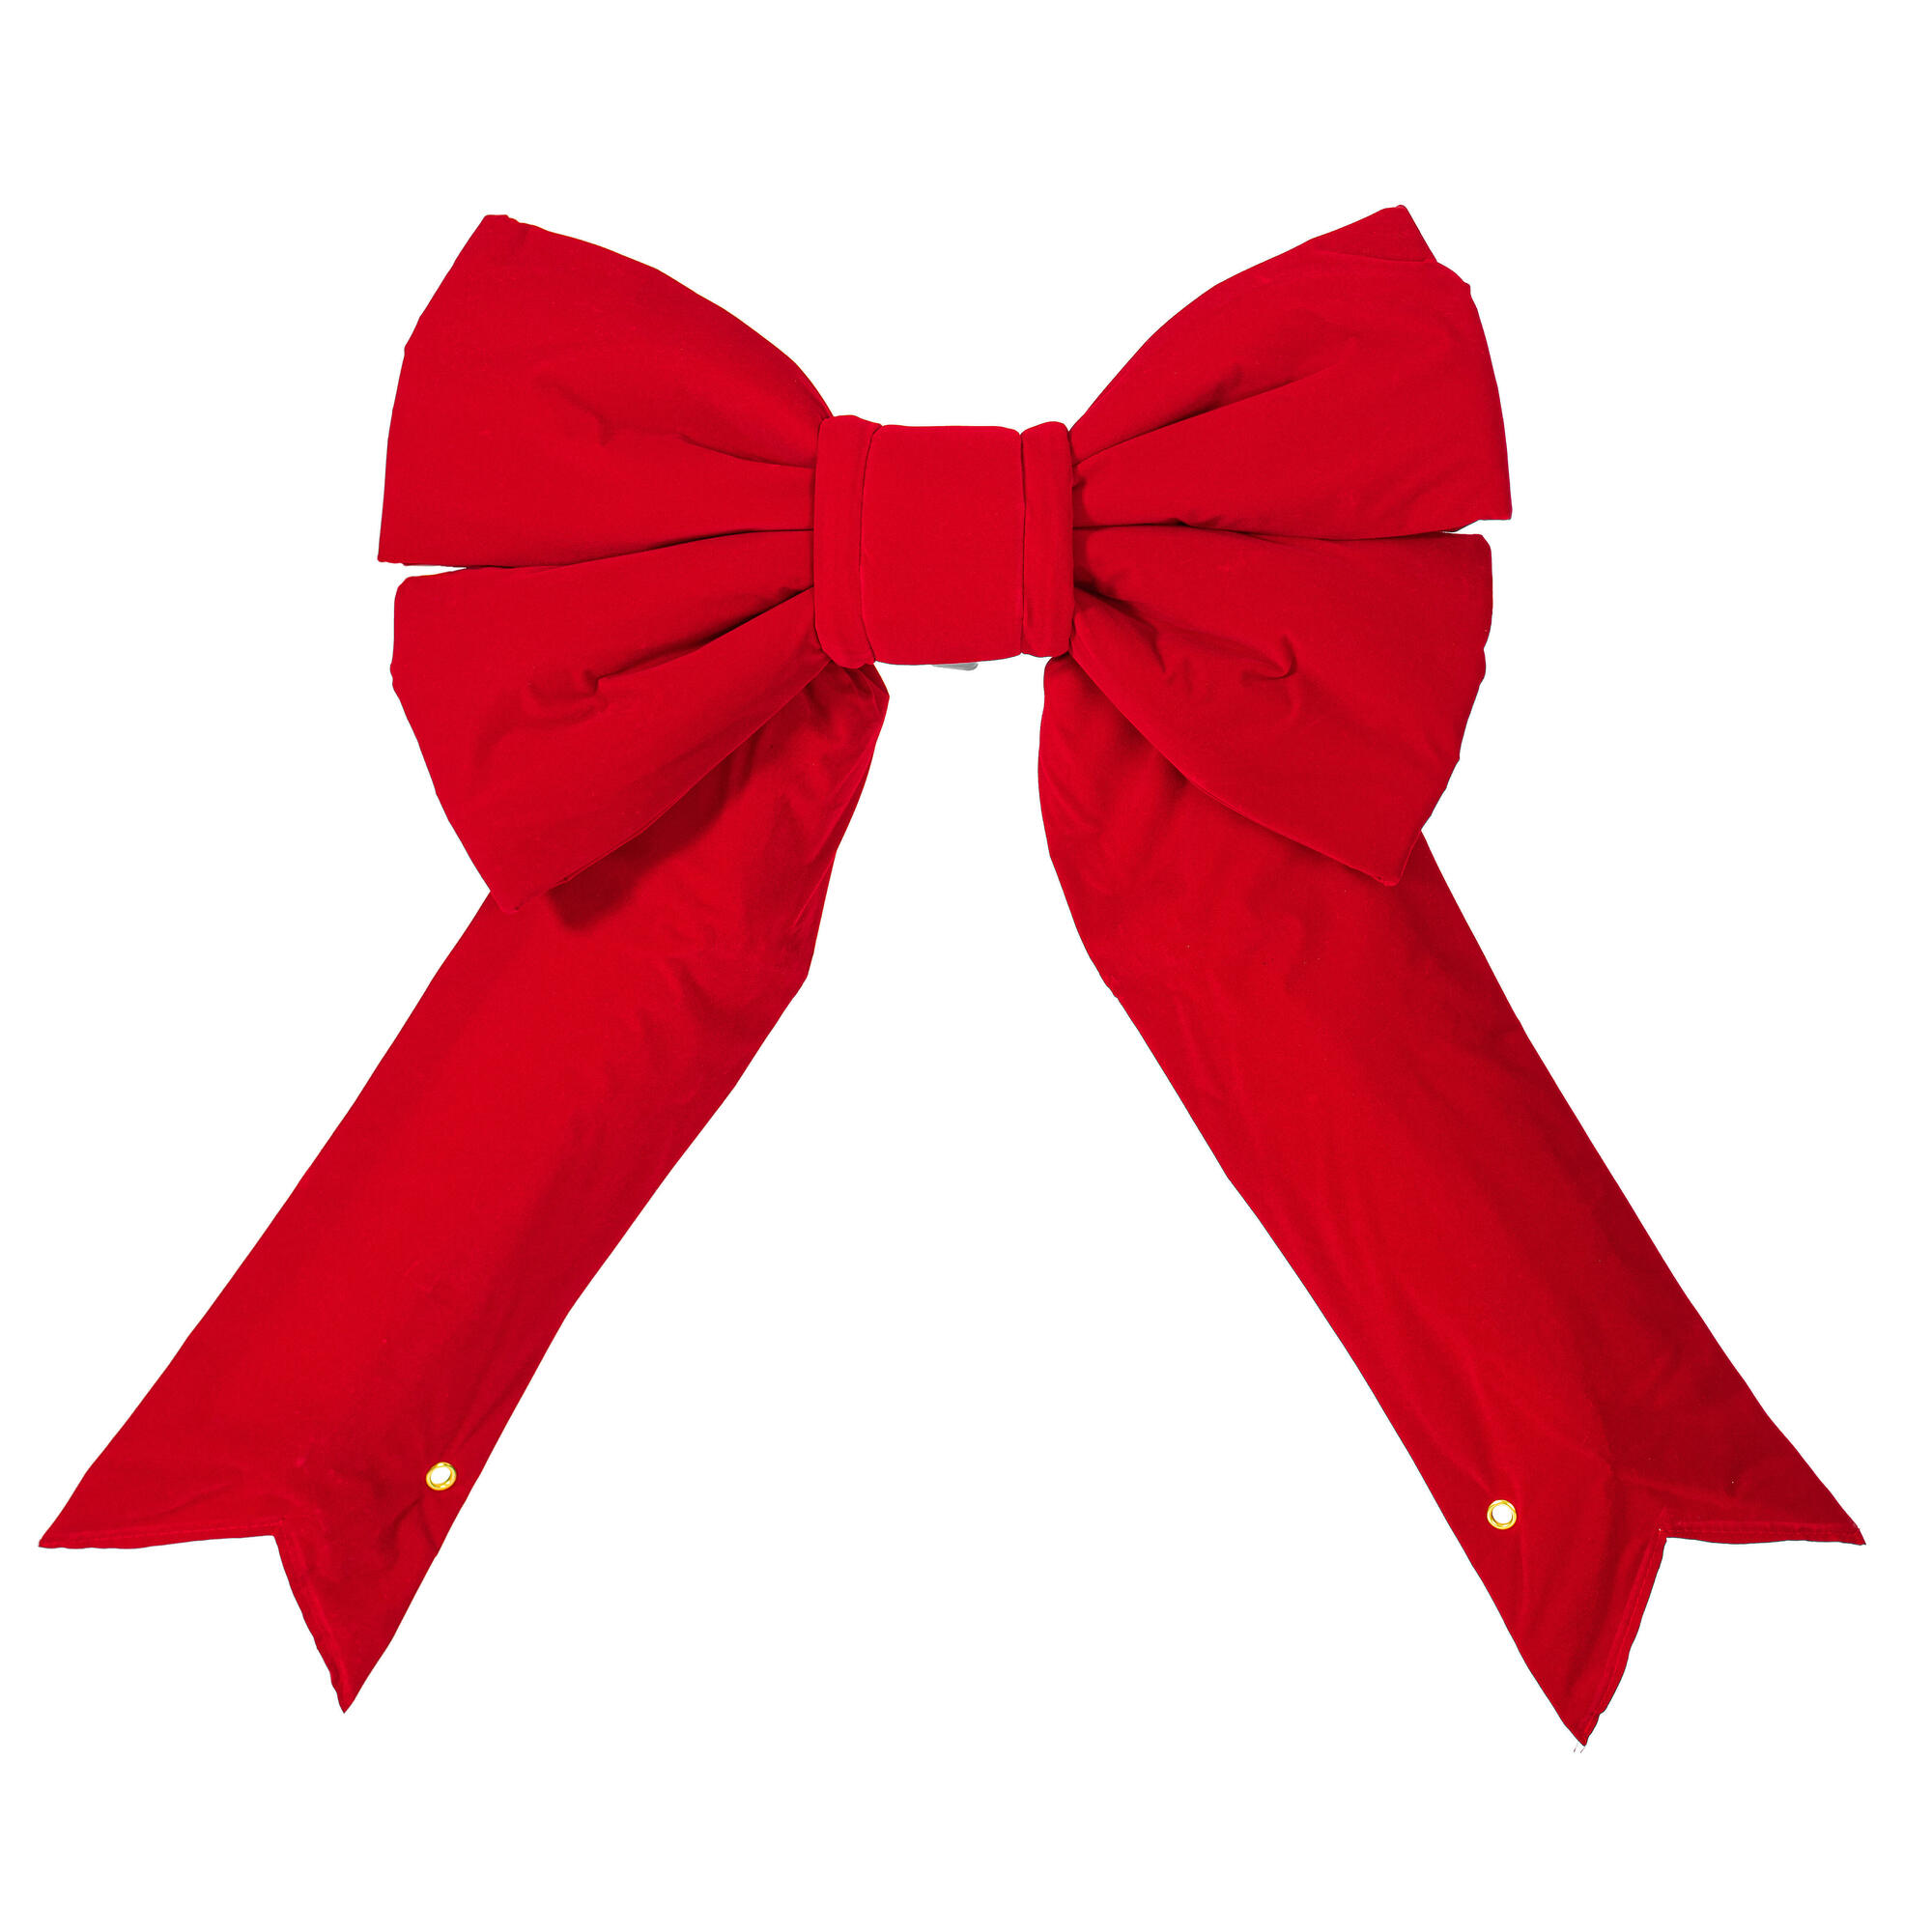 Vickerman 18" Red Velvet Outdoor Christmas Bow - image 1 of 3